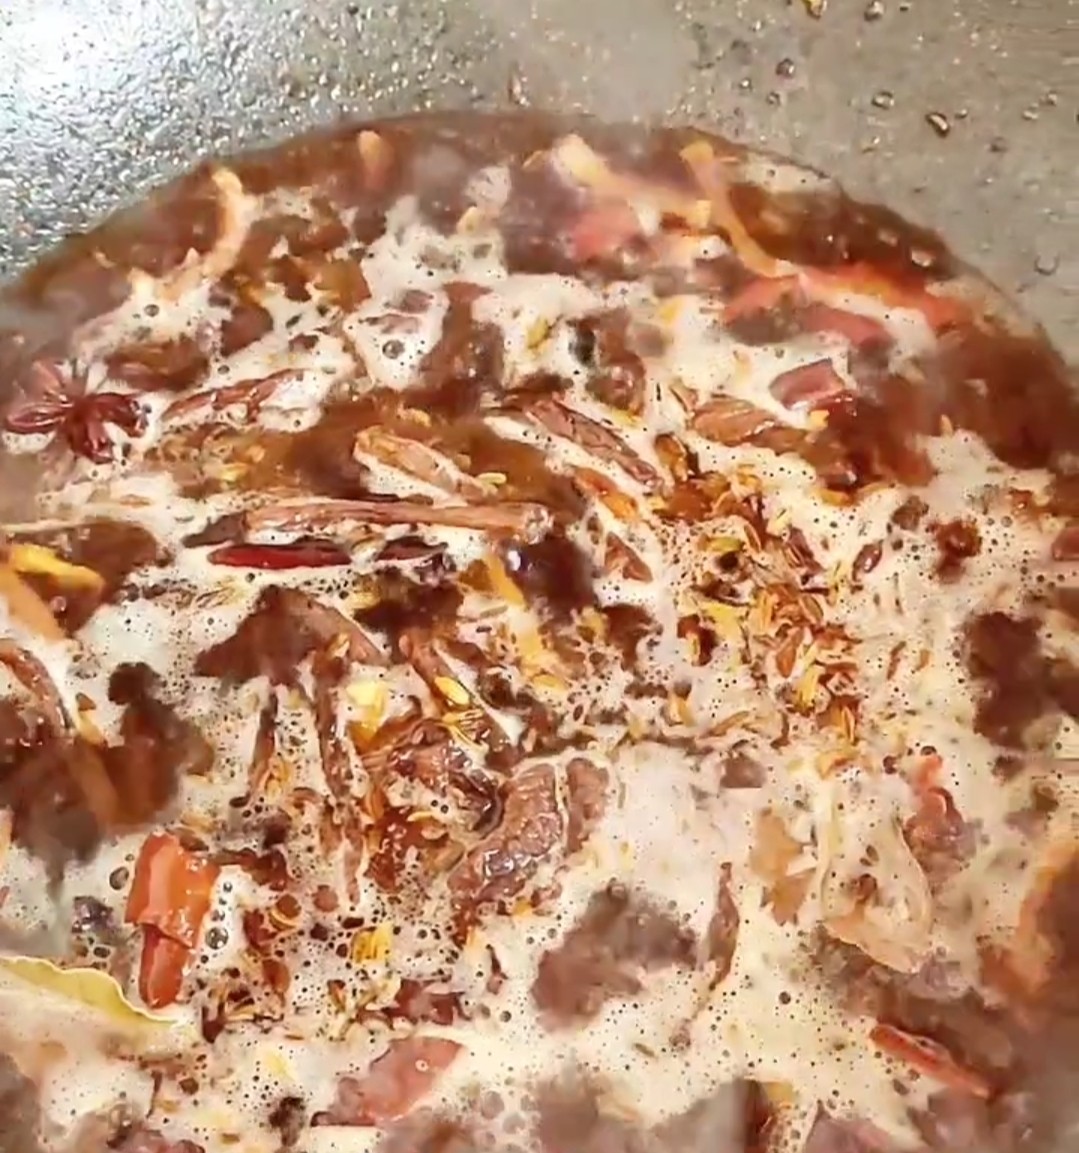 Cold Beef recipe